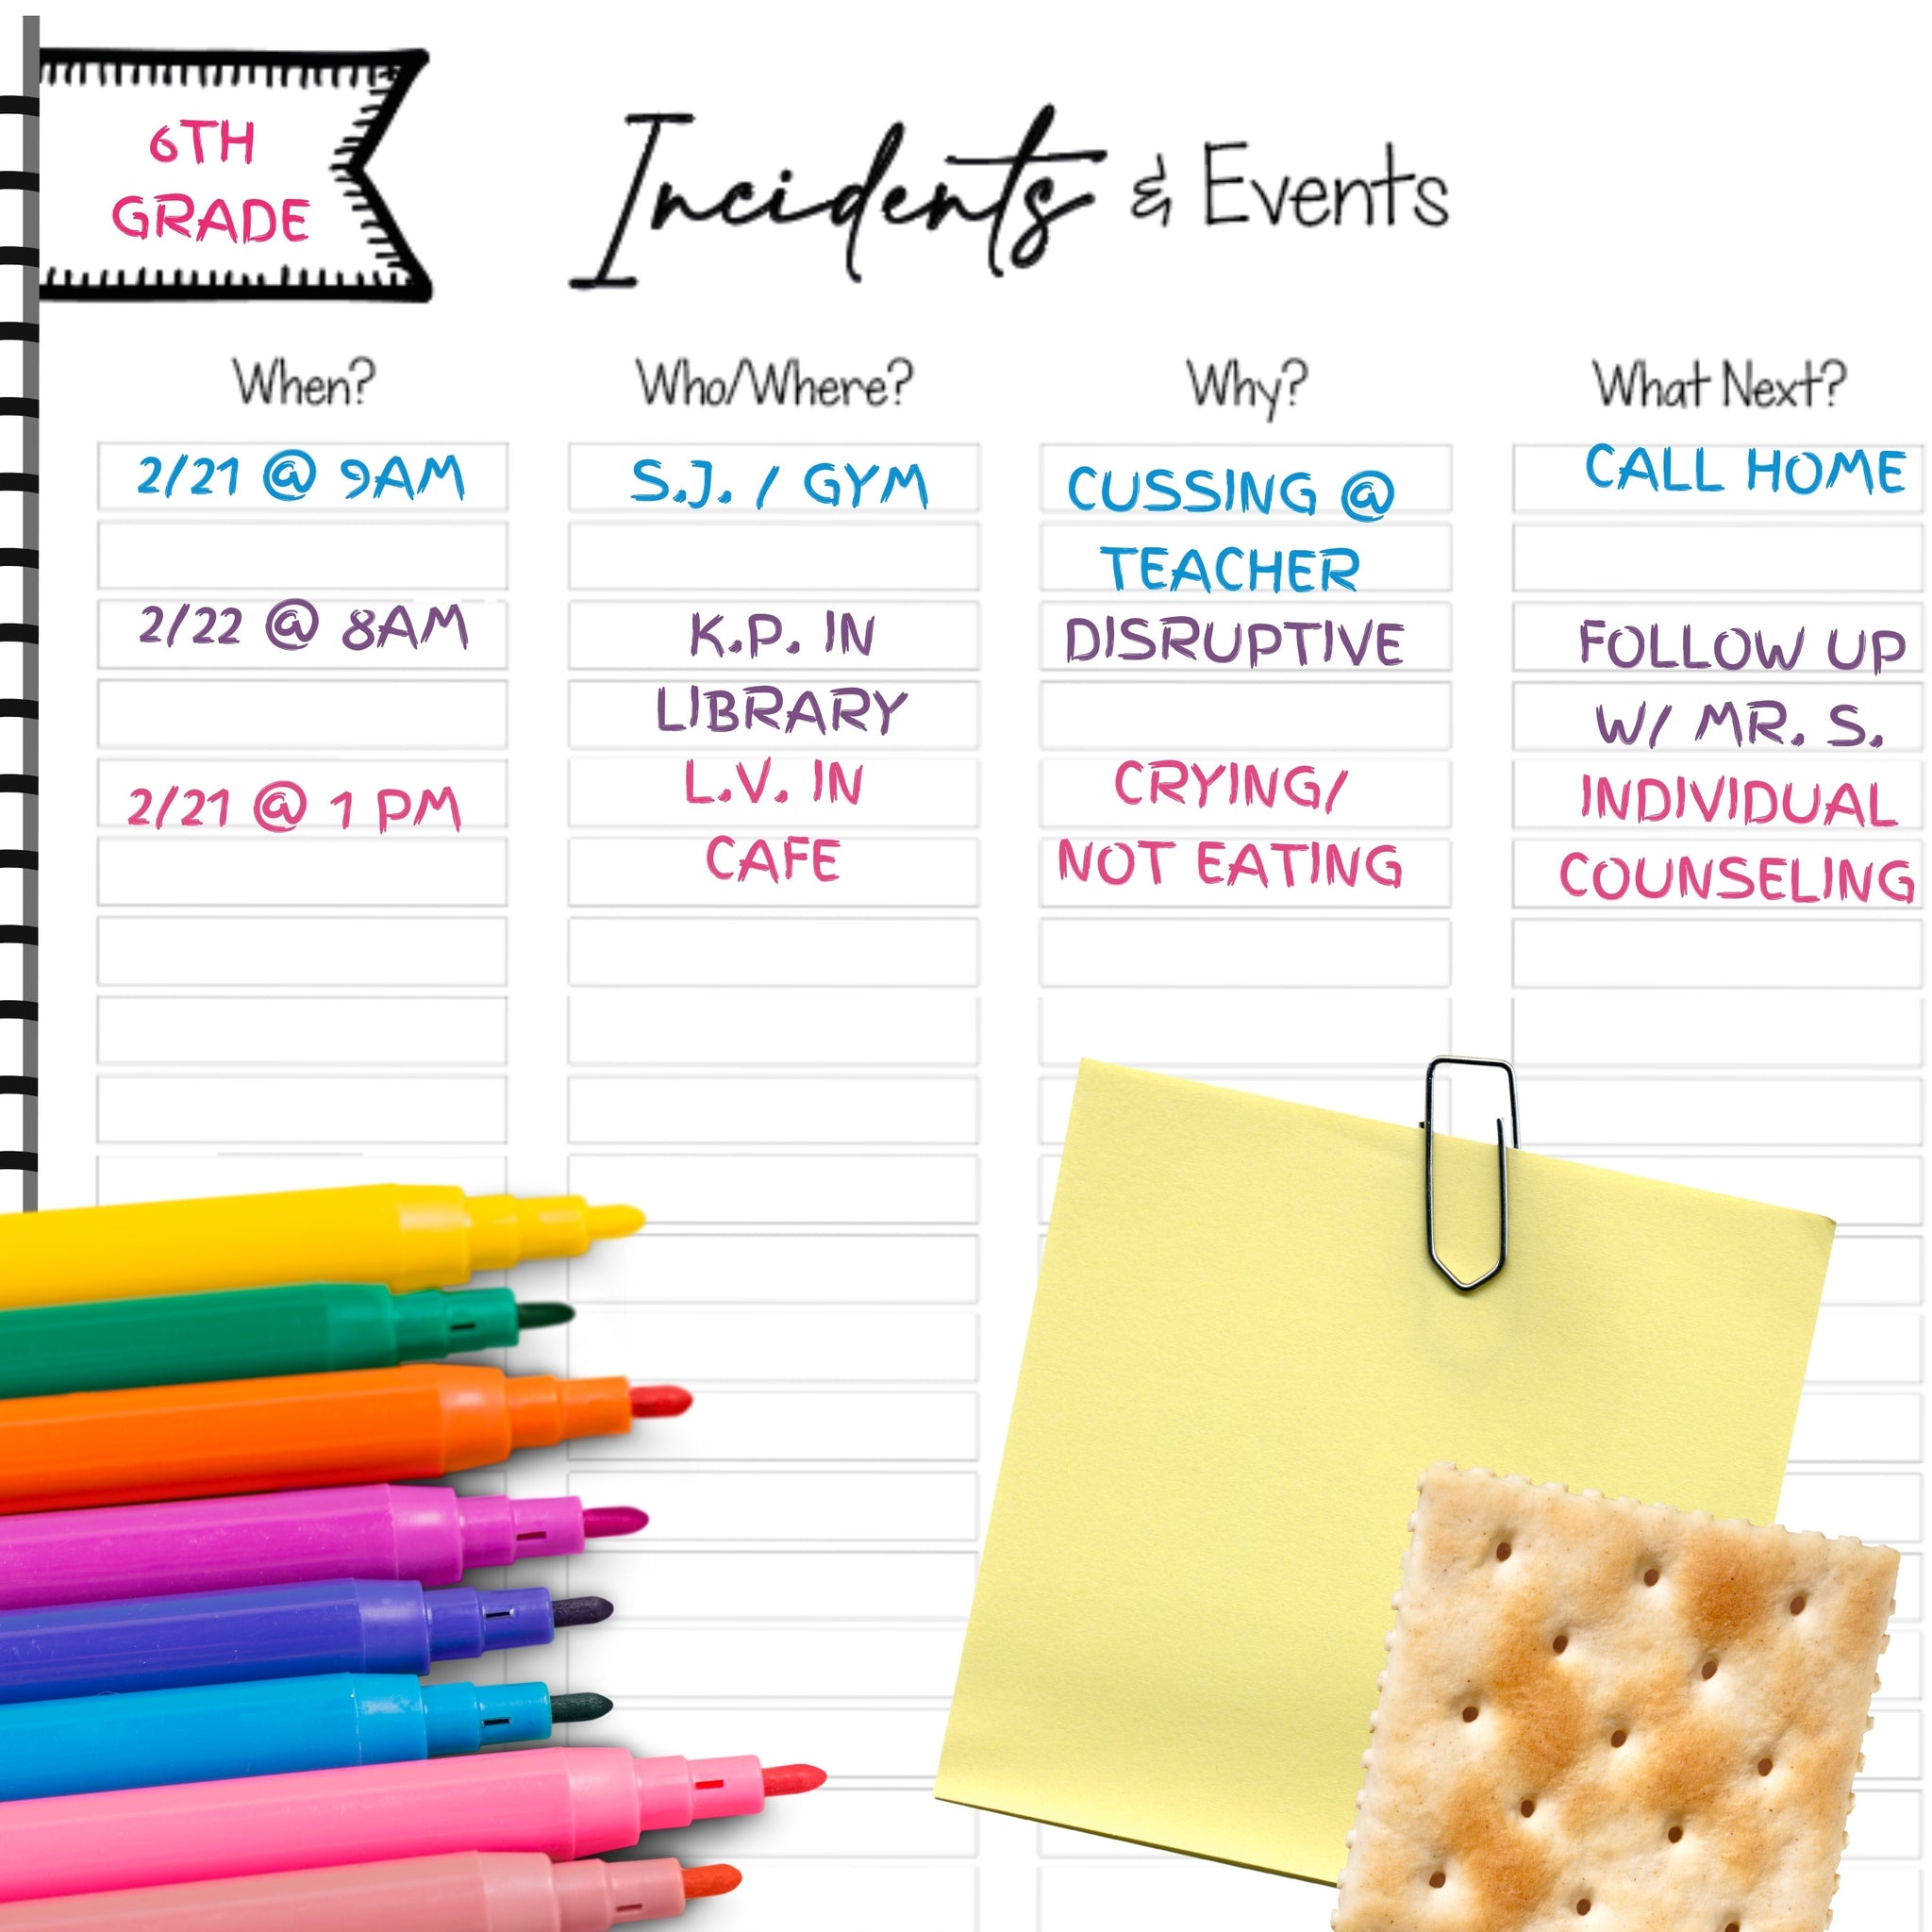 Wet Erase Fine Tip Planner Markers 4 pk for Printed Planner – The  Counseling Teacher Brandy